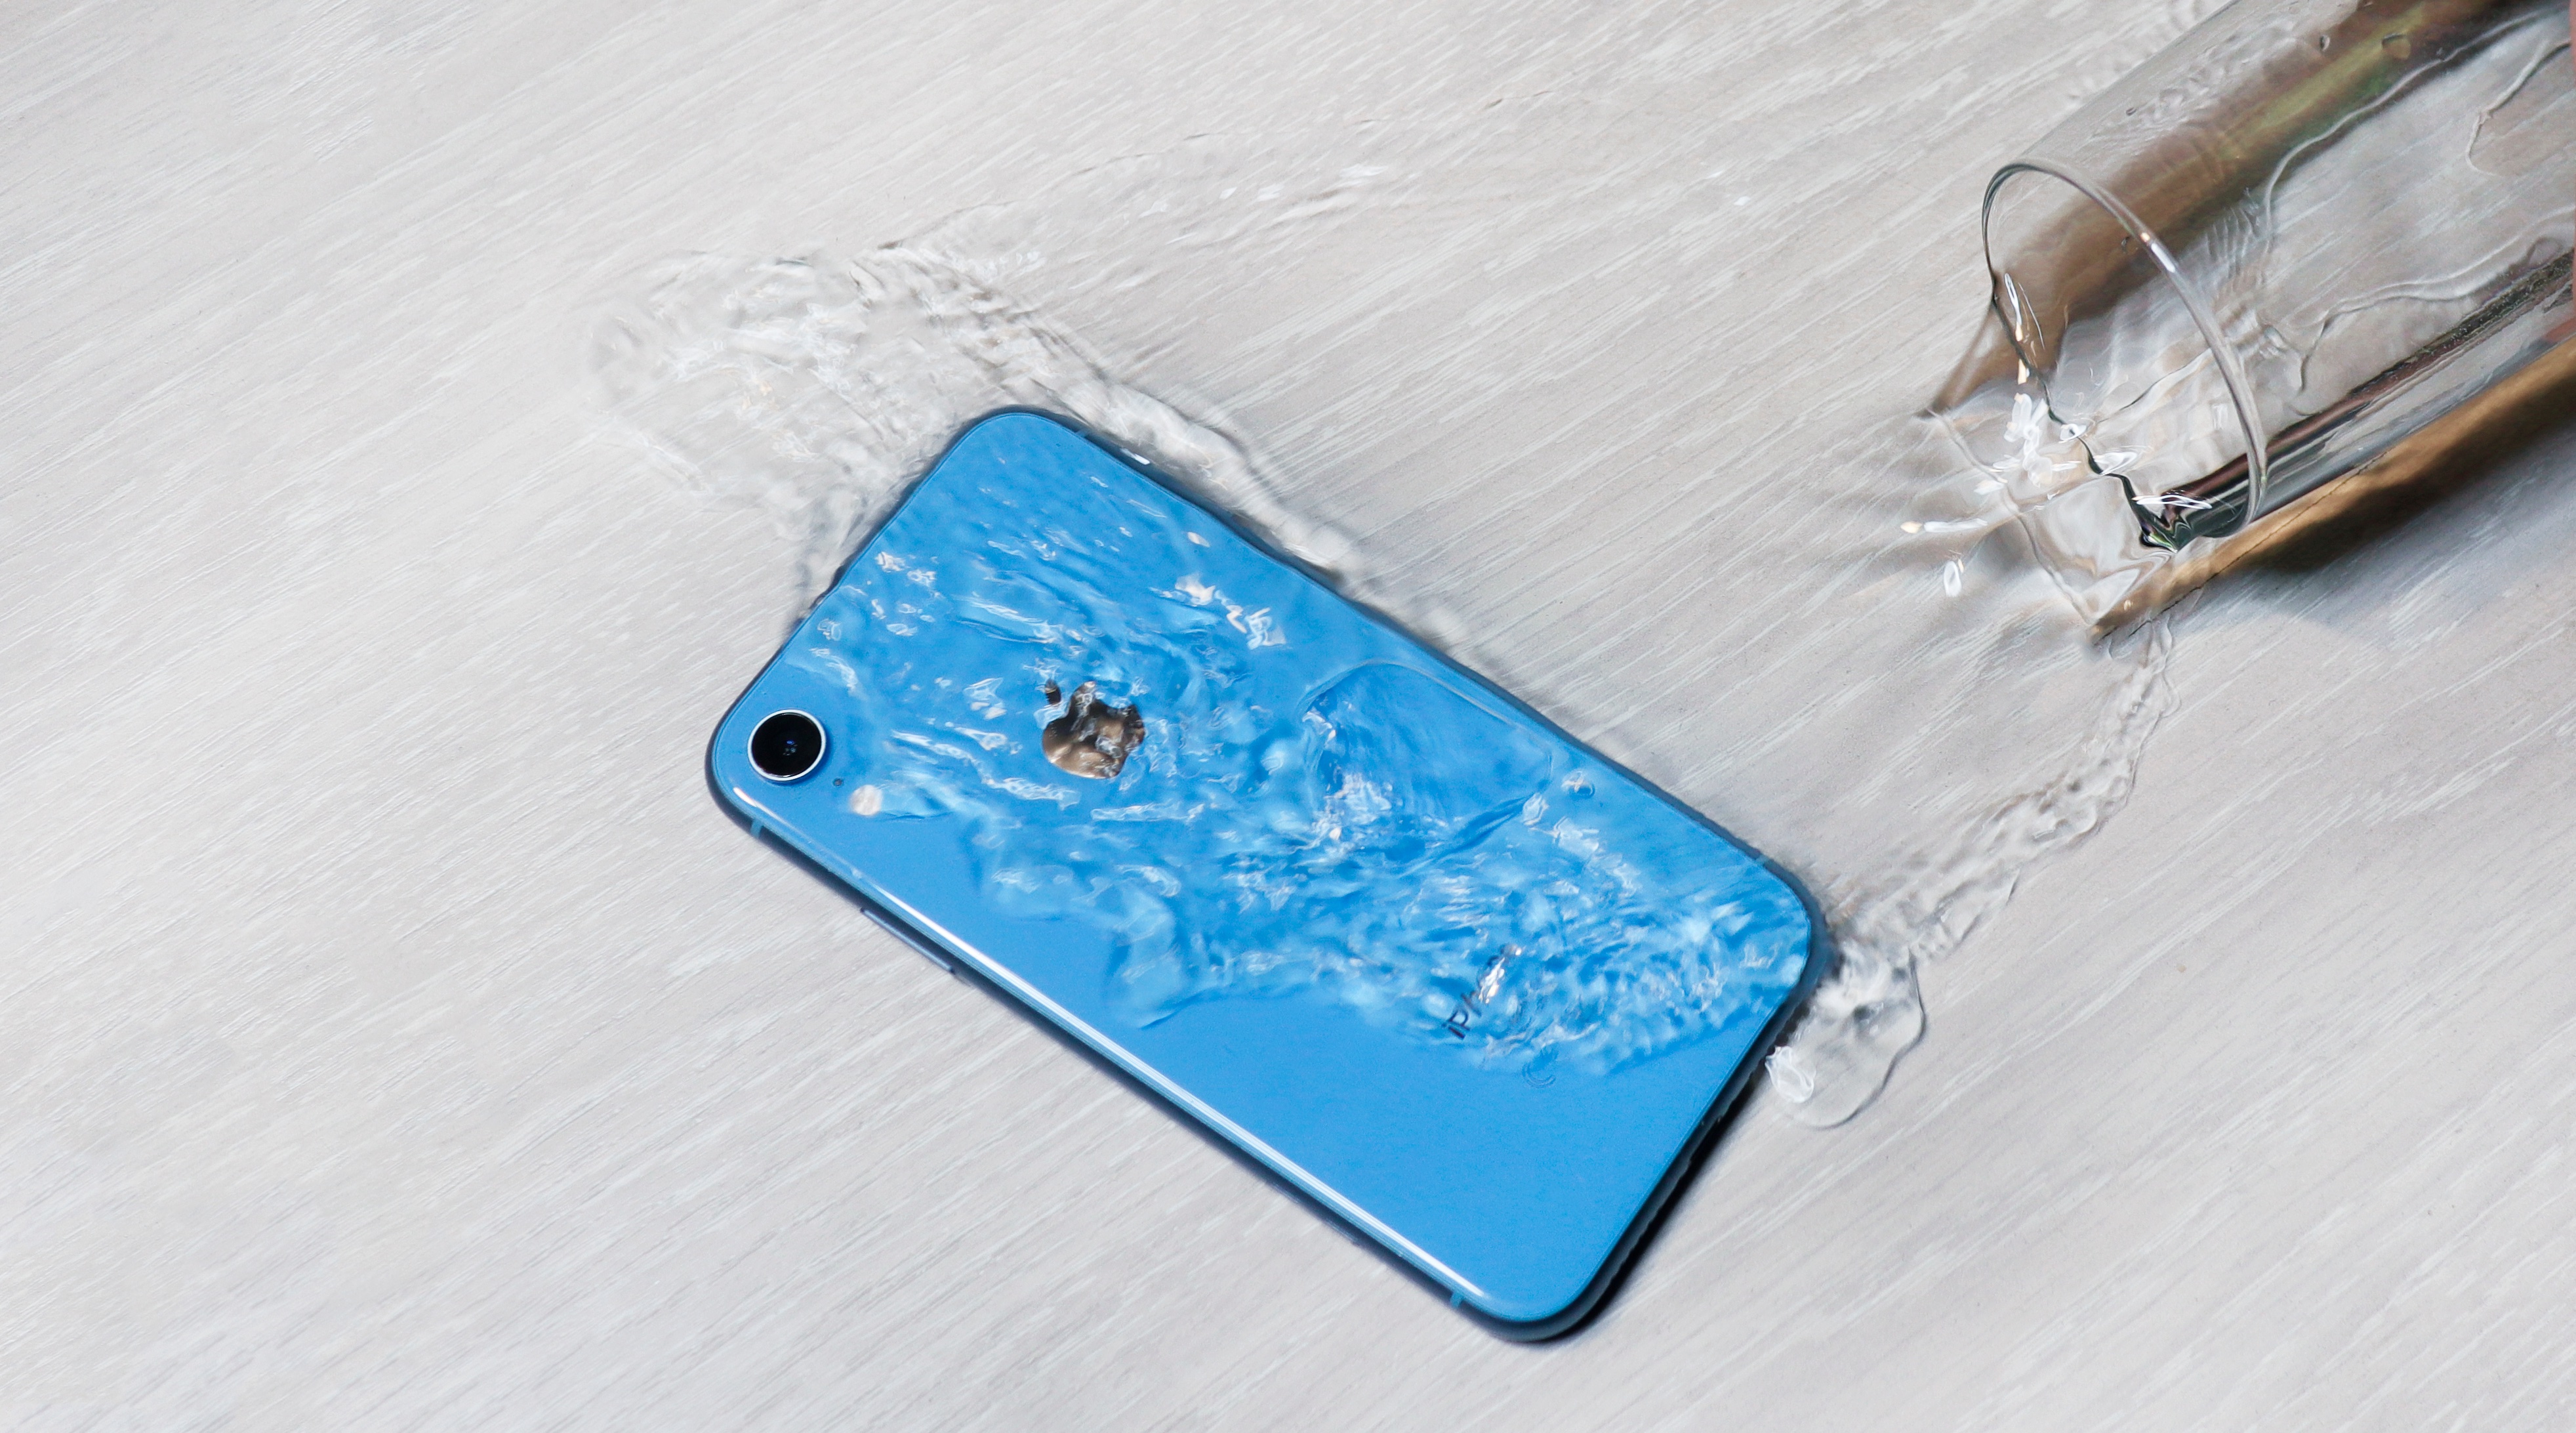 How to get water out of your phone — no rice required